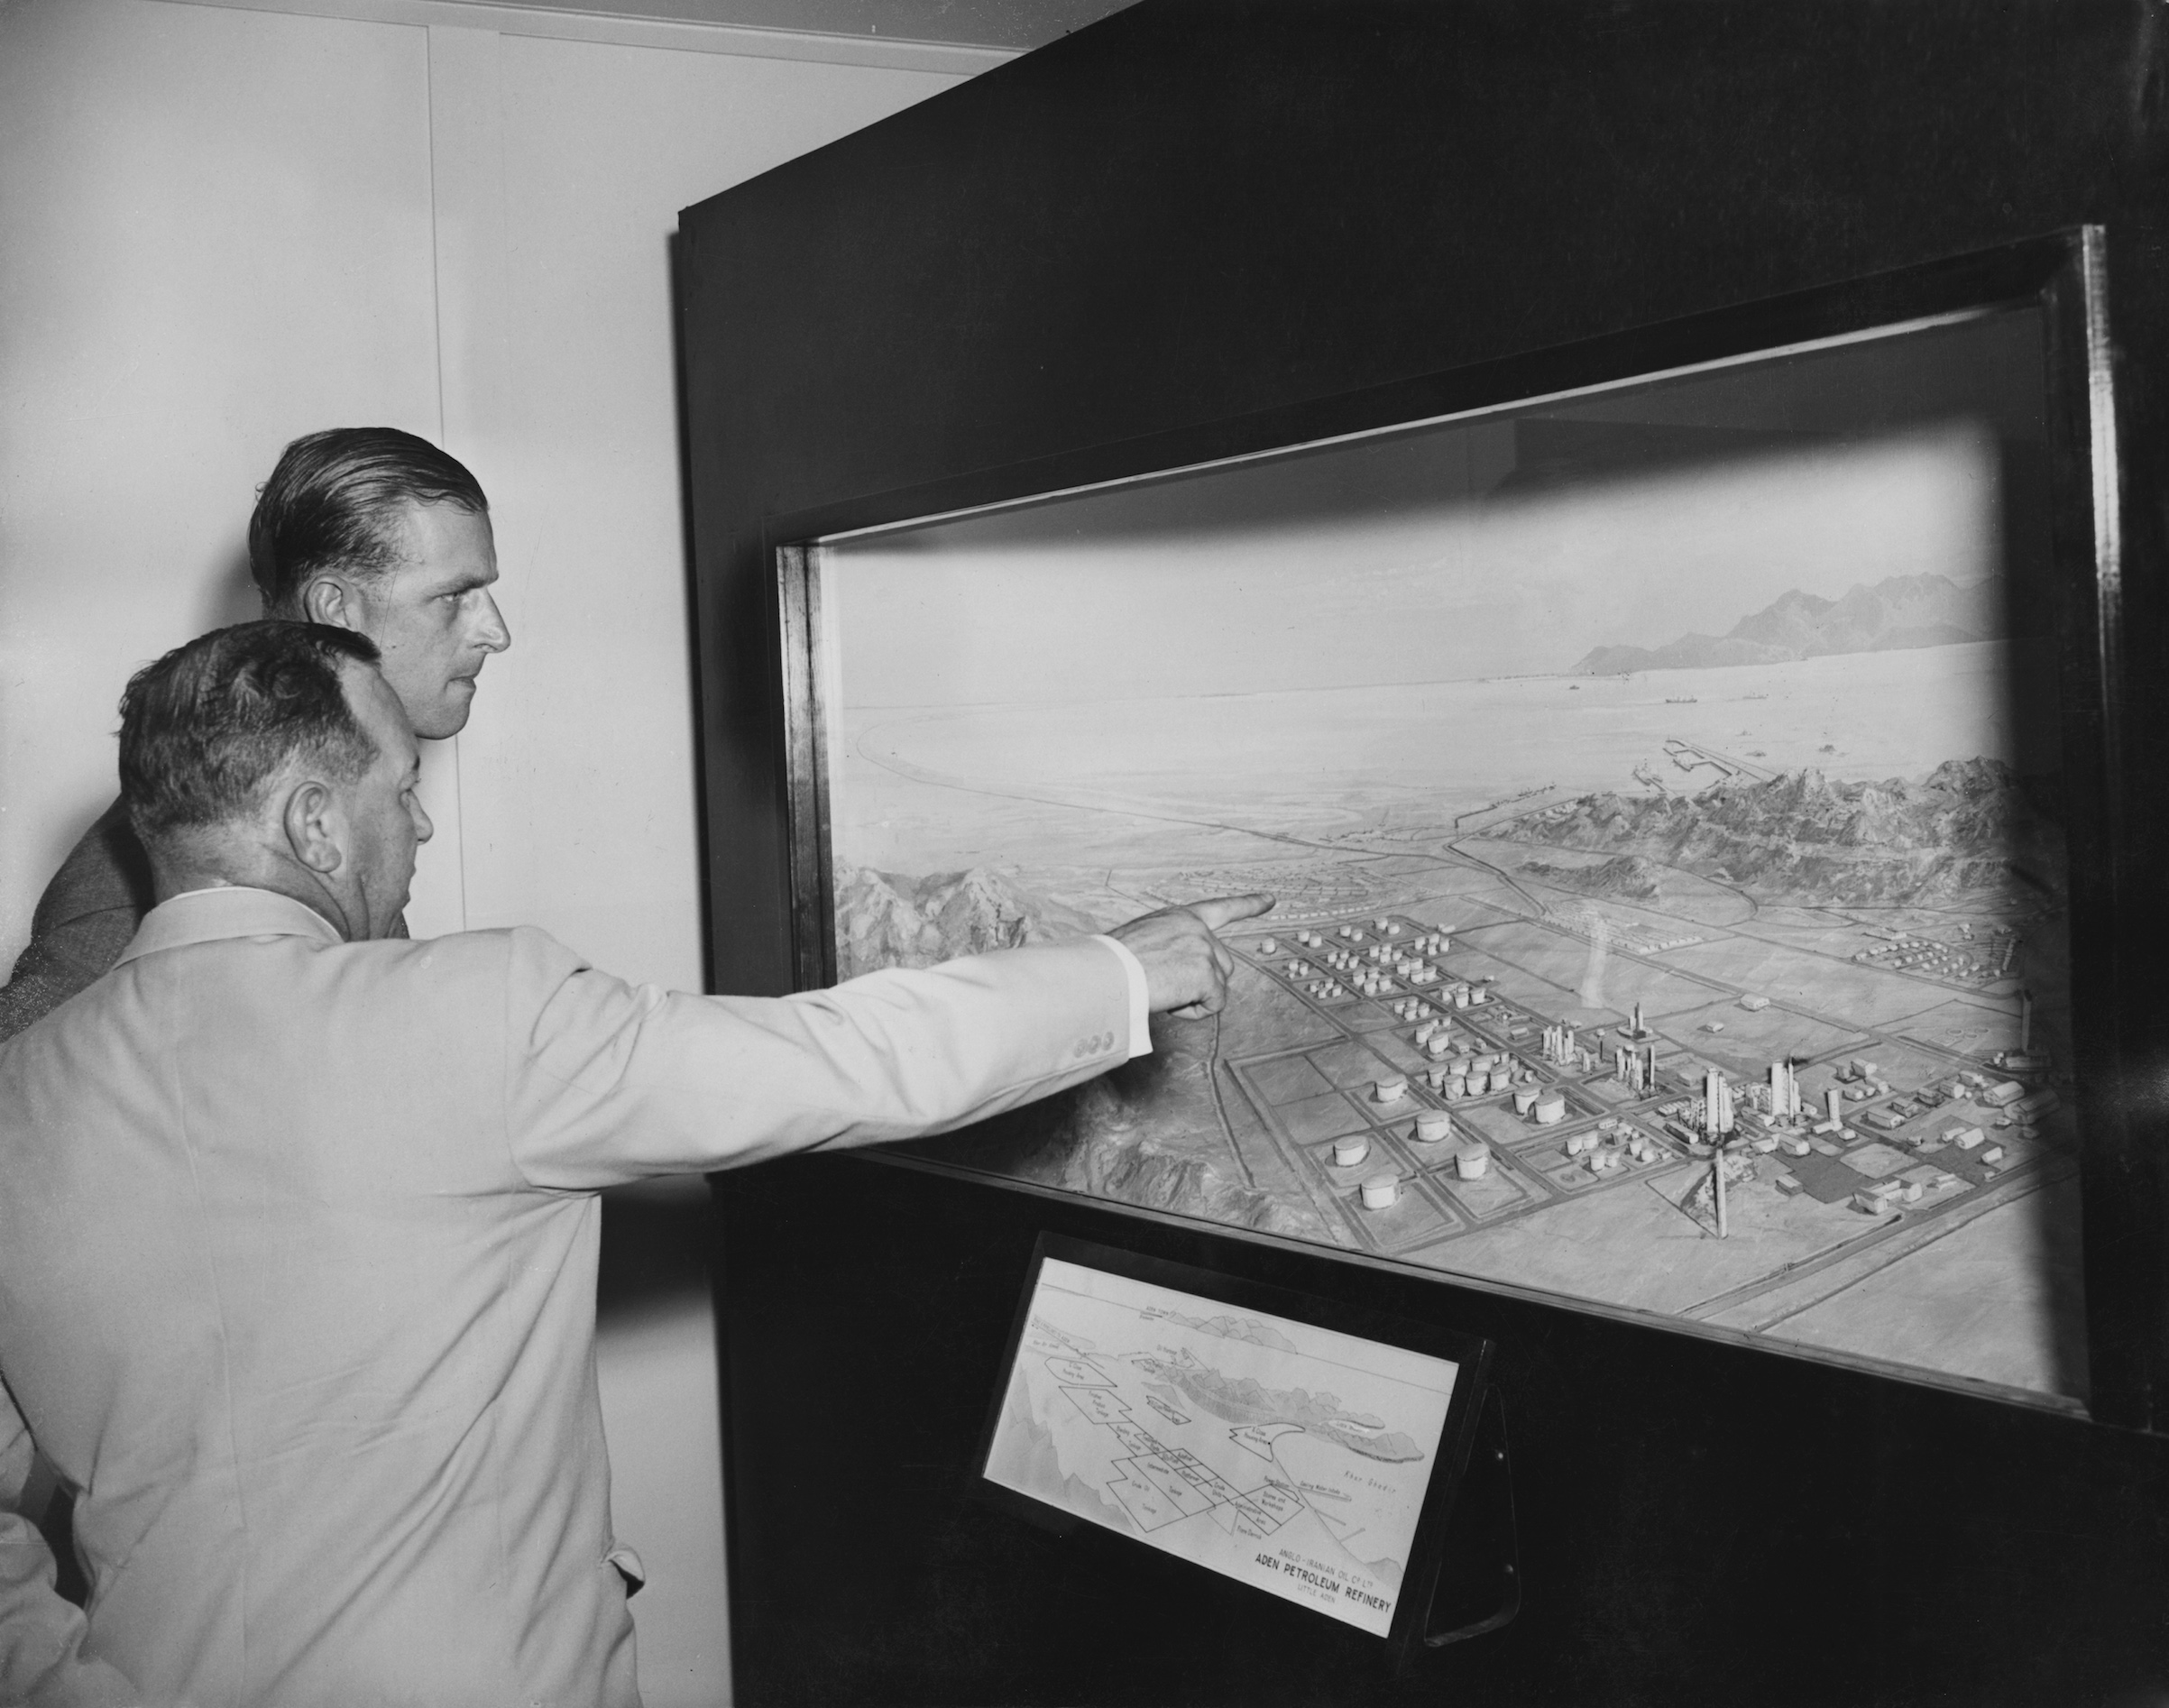 Prince Philip, Duke of Edinburgh visits the Aden Petroleum Refinery, an Anglo-Iranian Oil Company refinery at Little Aden during a Commonwealth visit to Yemen, April 27,1954. Here he is shown a panoramic model of the refinery by General Manager A. W. G. Trantor. (William Vanderson/Getty Images)